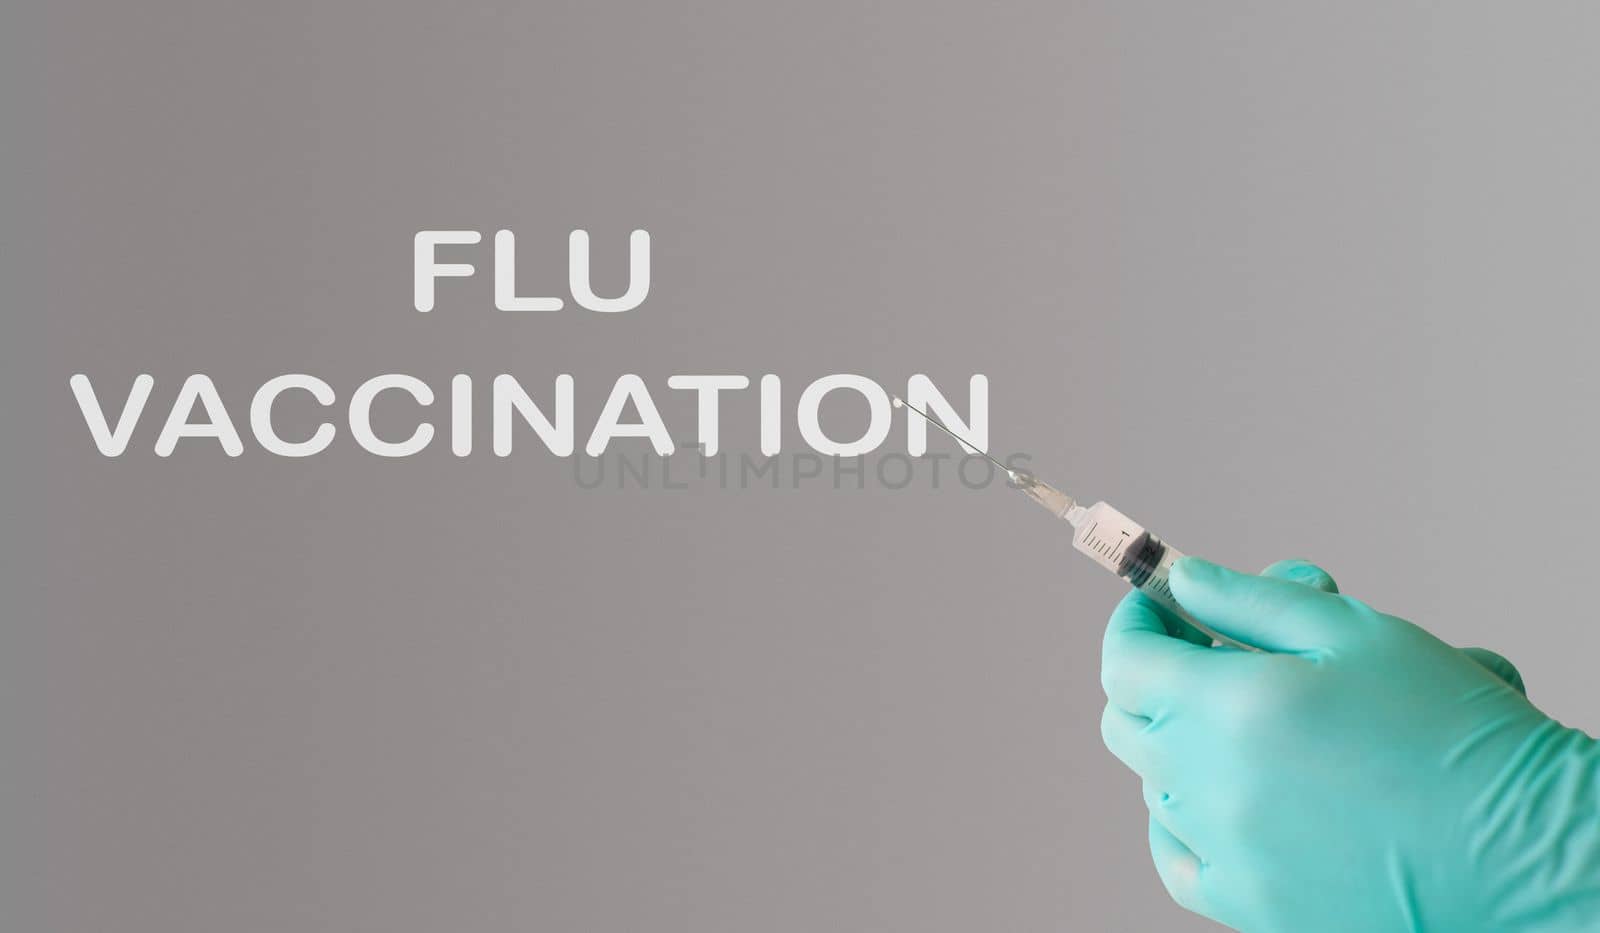 flu vaccination text on gray background. Flu protection concept by Alla_Morozova93